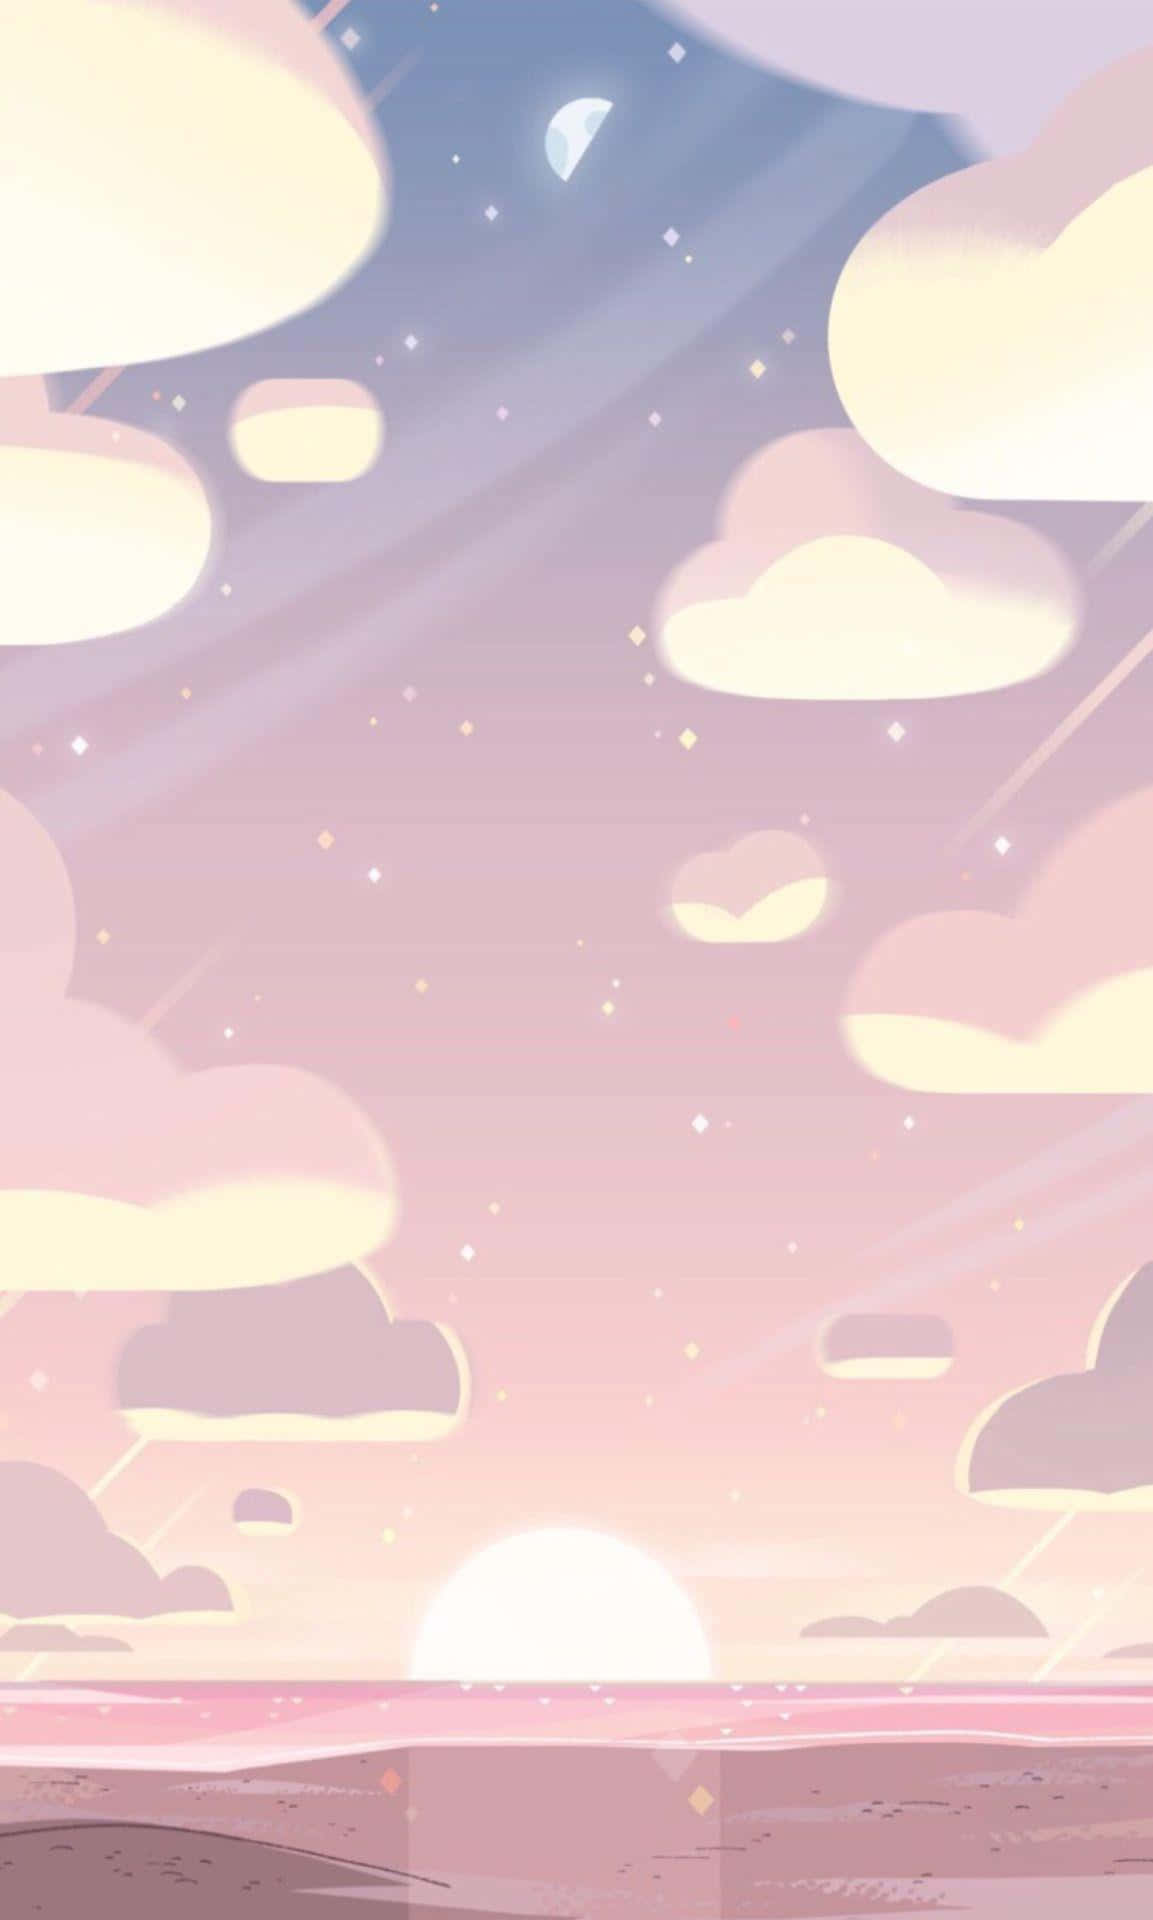 "Unlock your creativity with this cute aesthetic background!"